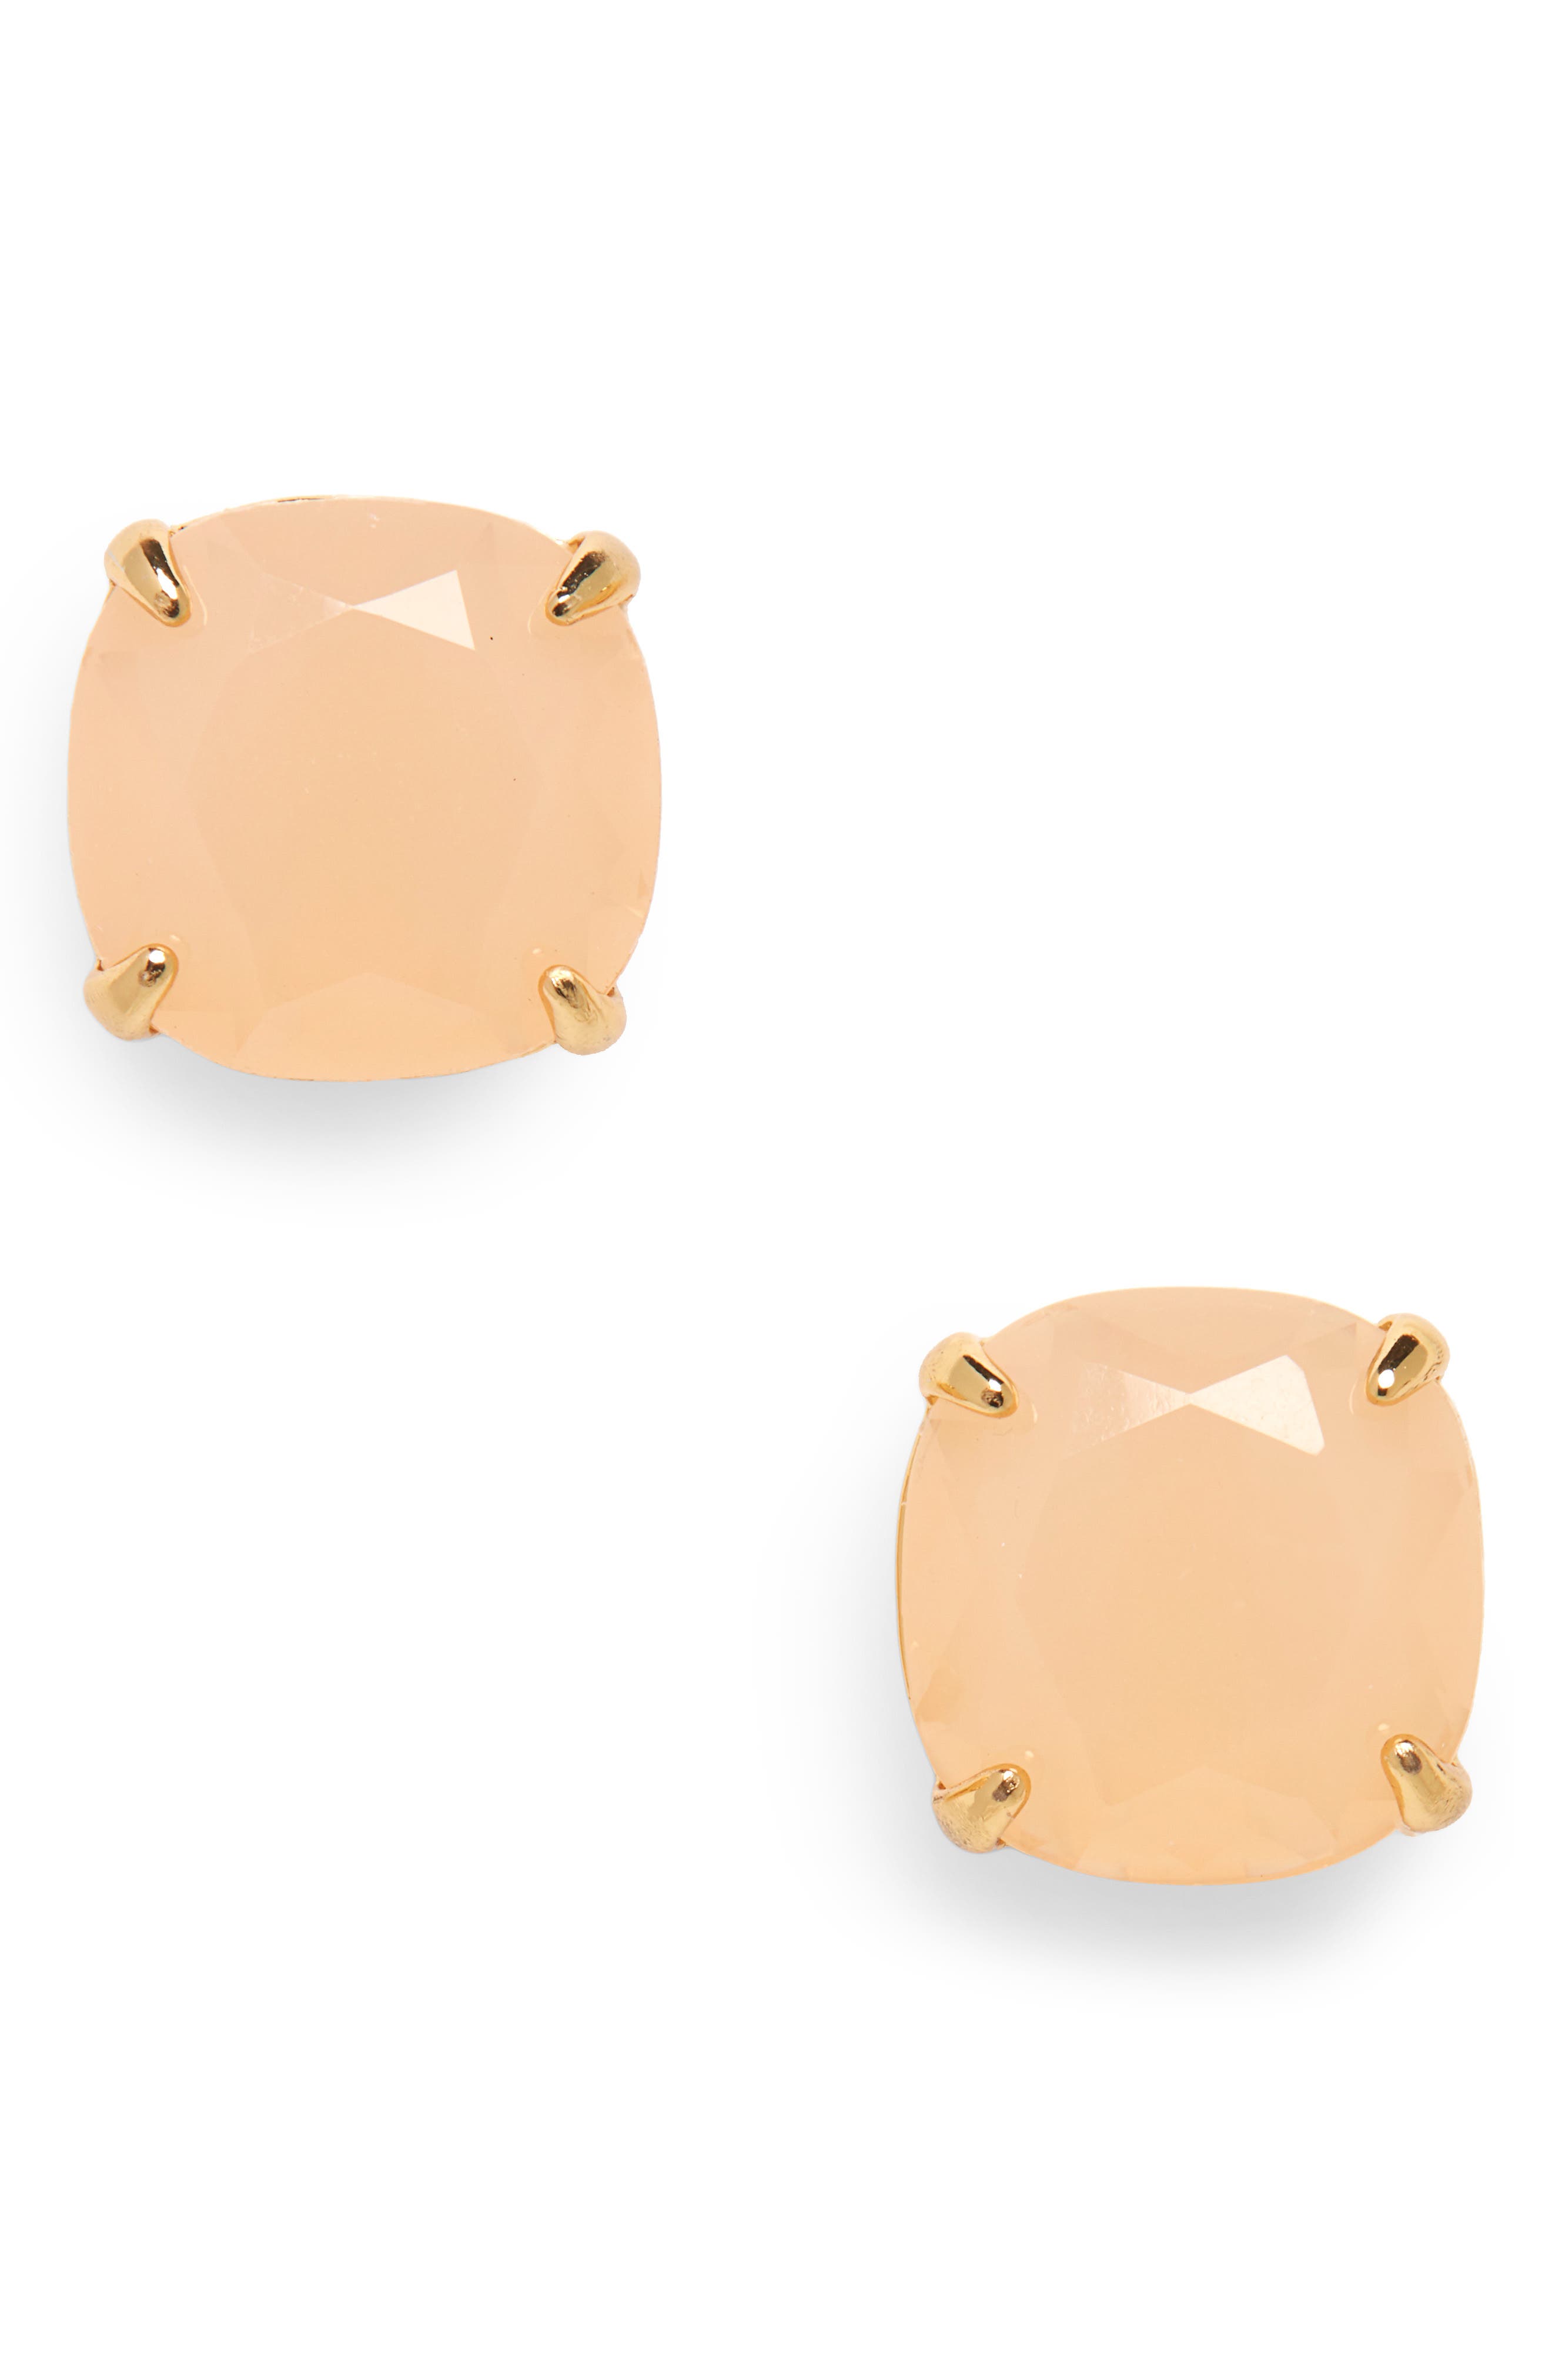 Tiny Creme Colored Pierced Earrings